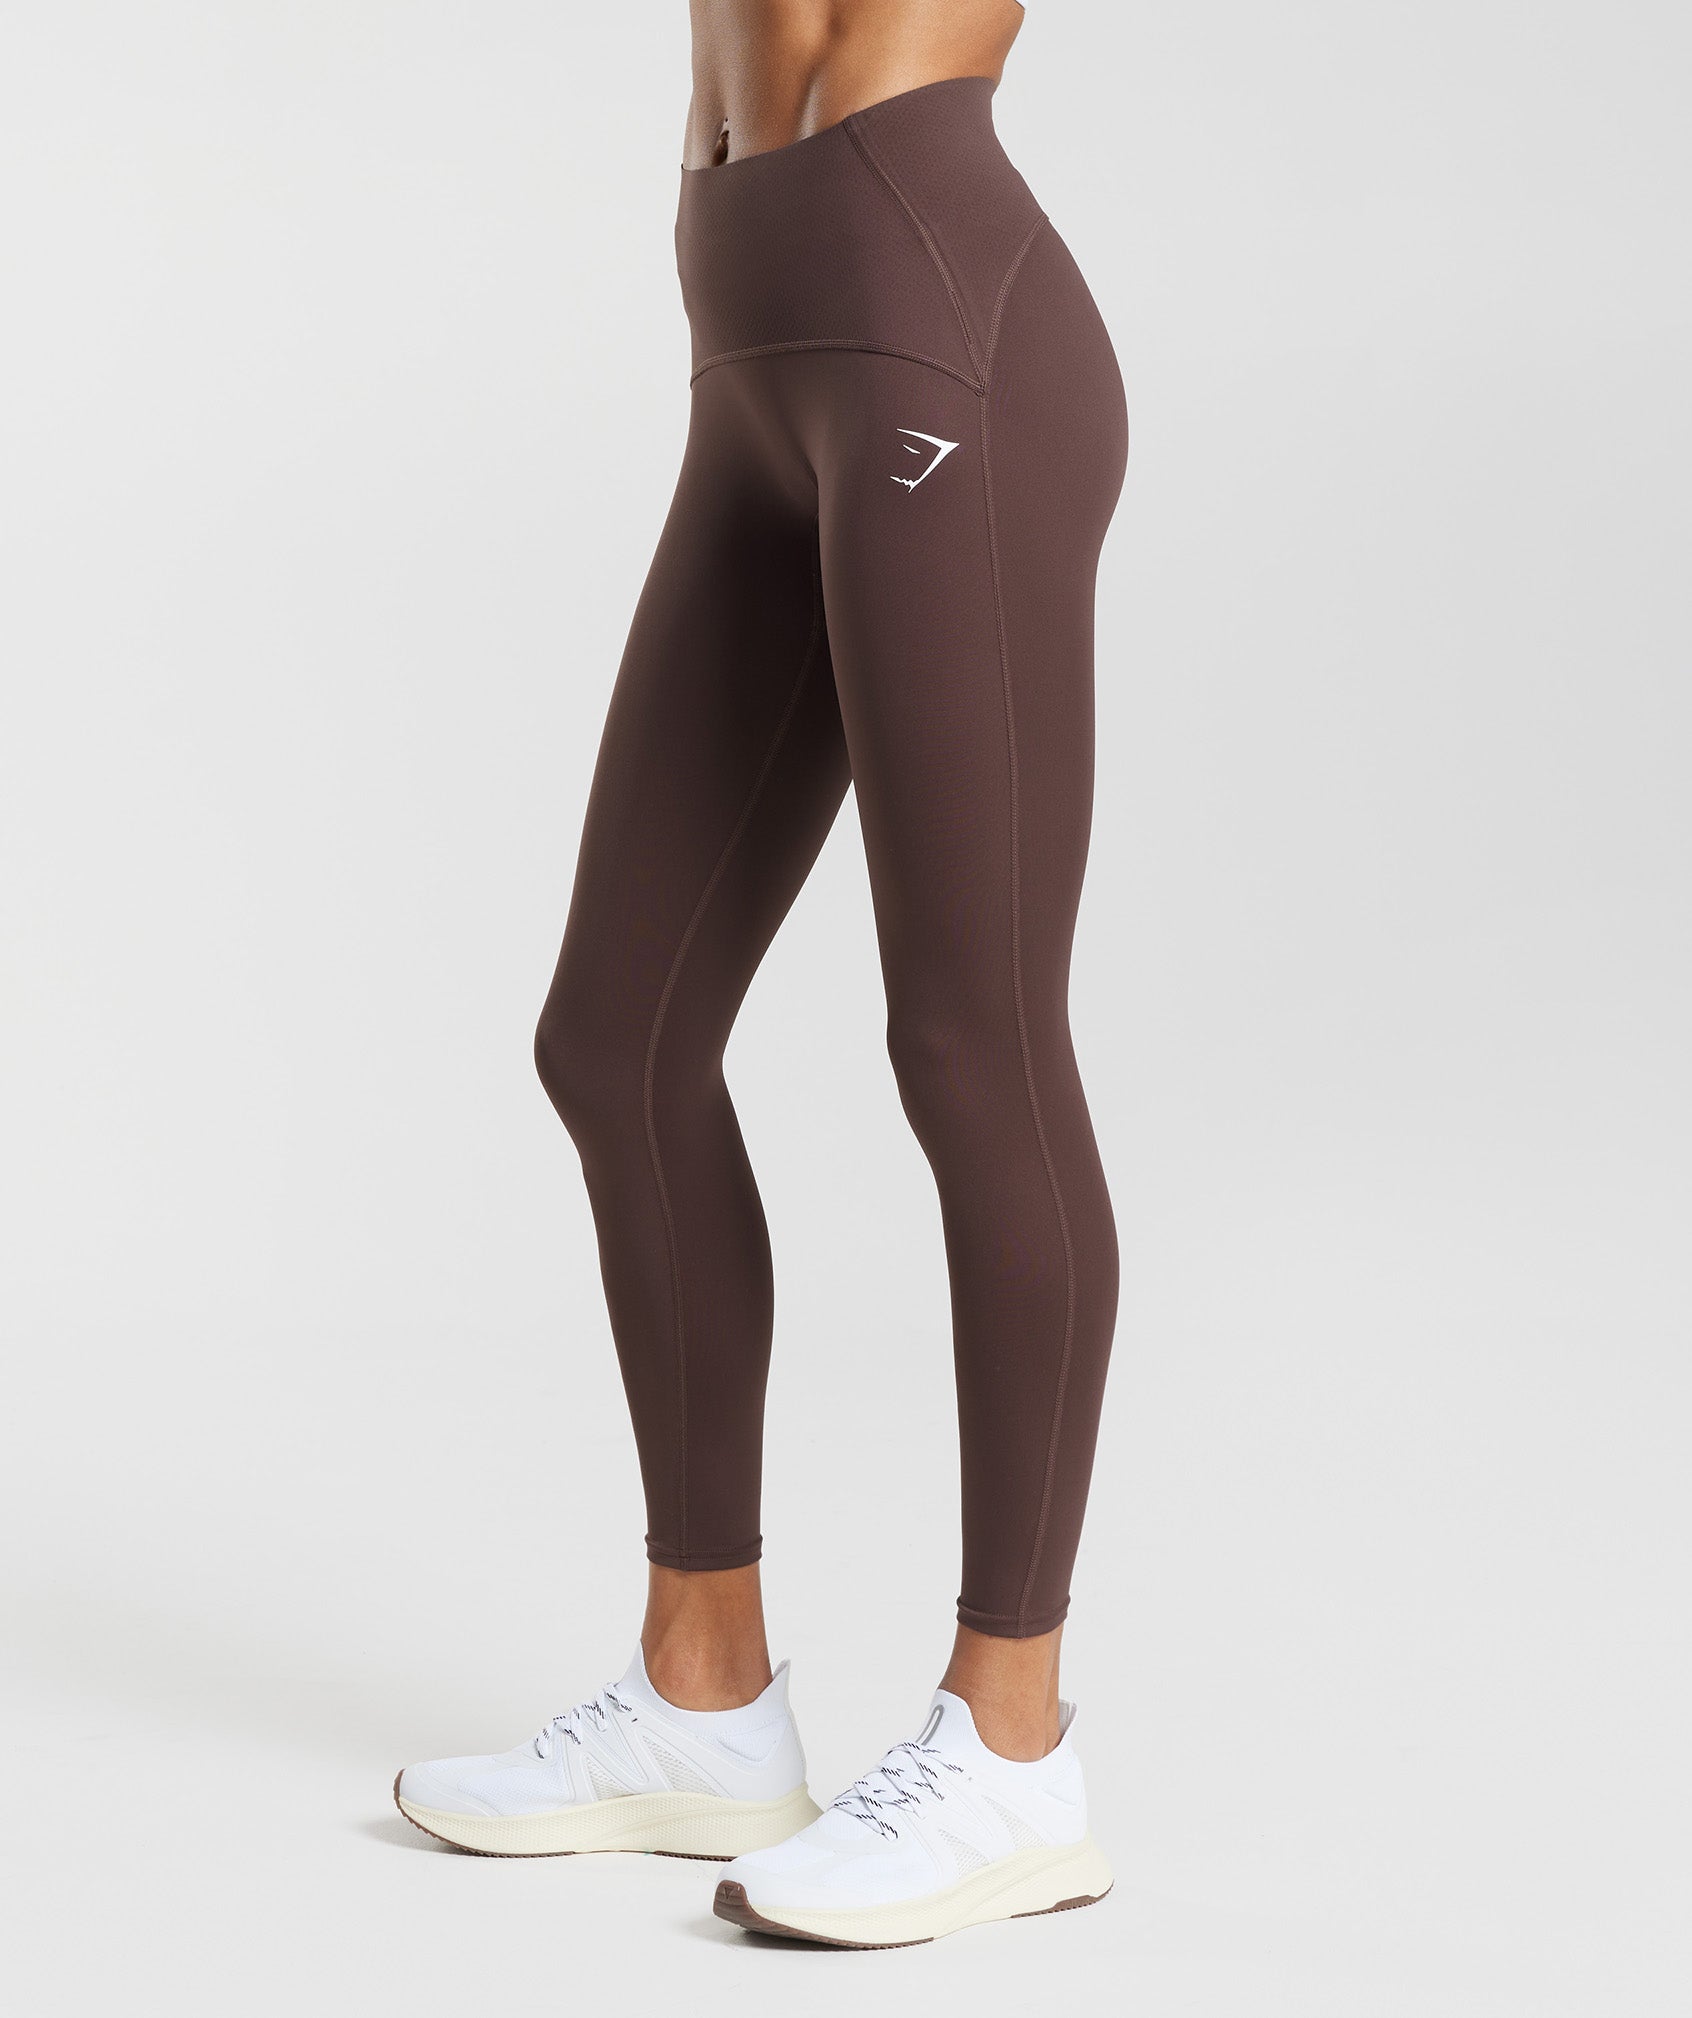 Waist Support Leggings in Chocolate Brown - view 3